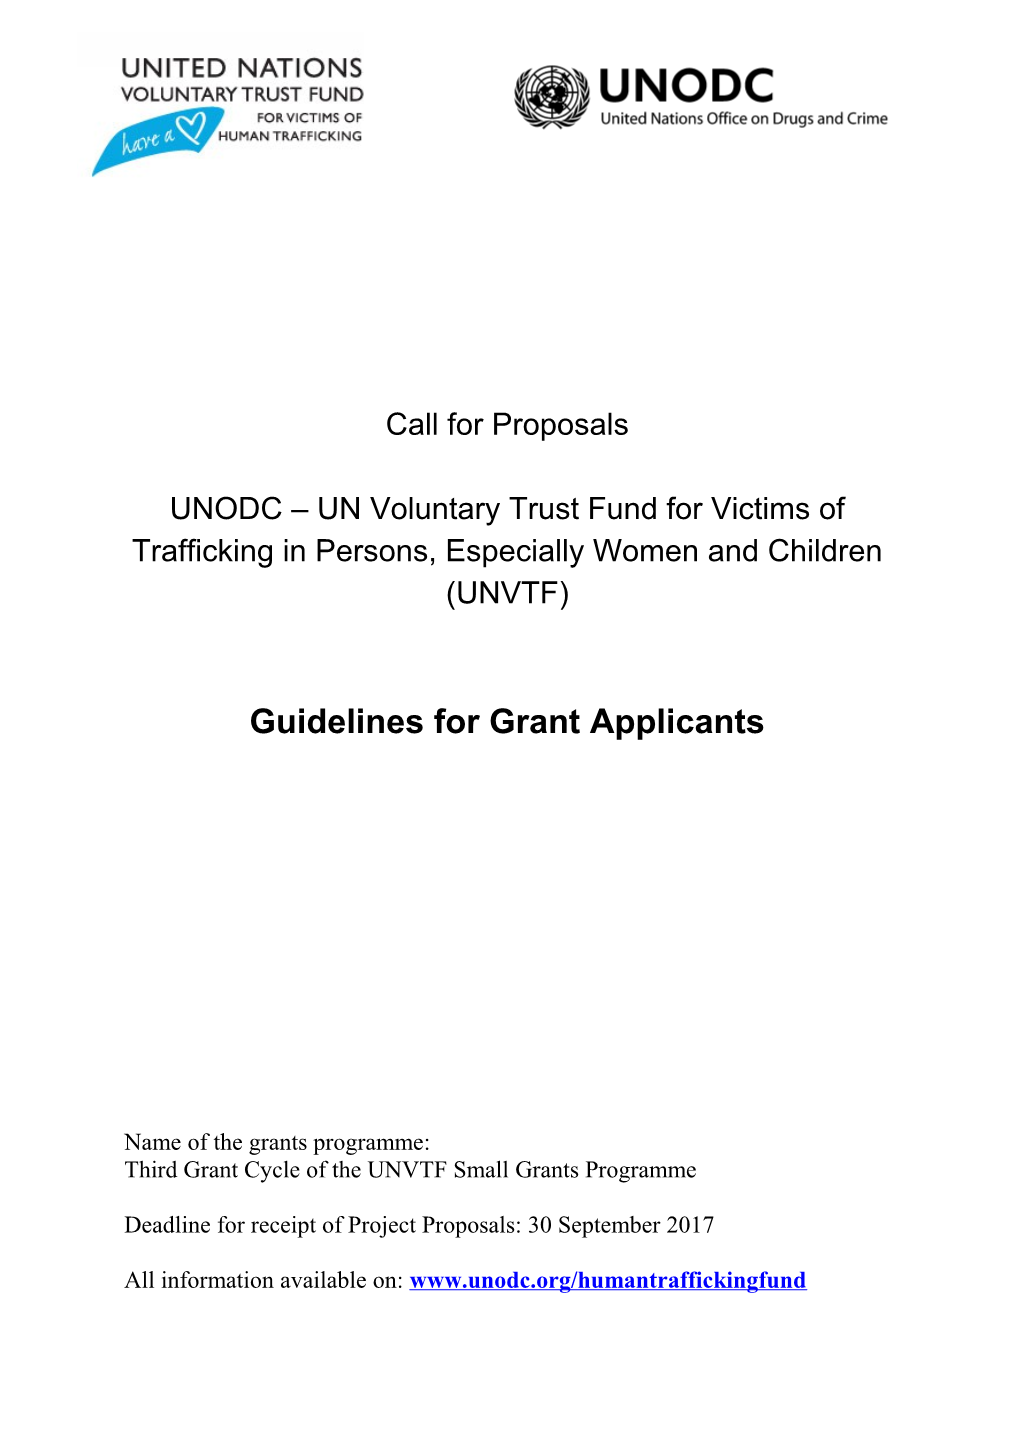 Guidelines for Grant Applicants